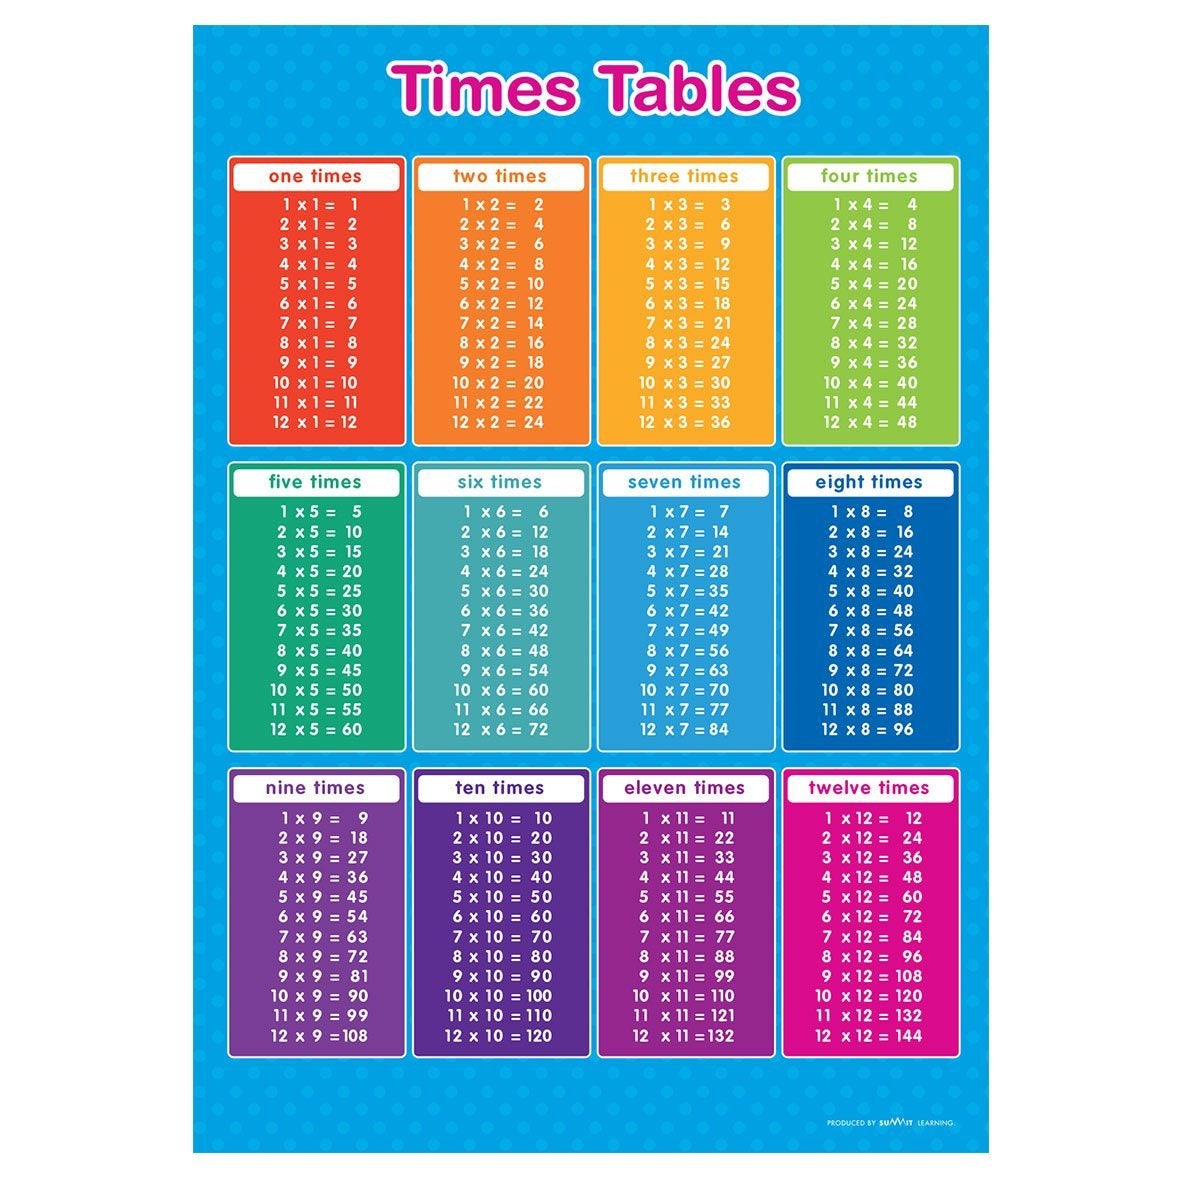 9 times table chart up to 20 - liomar